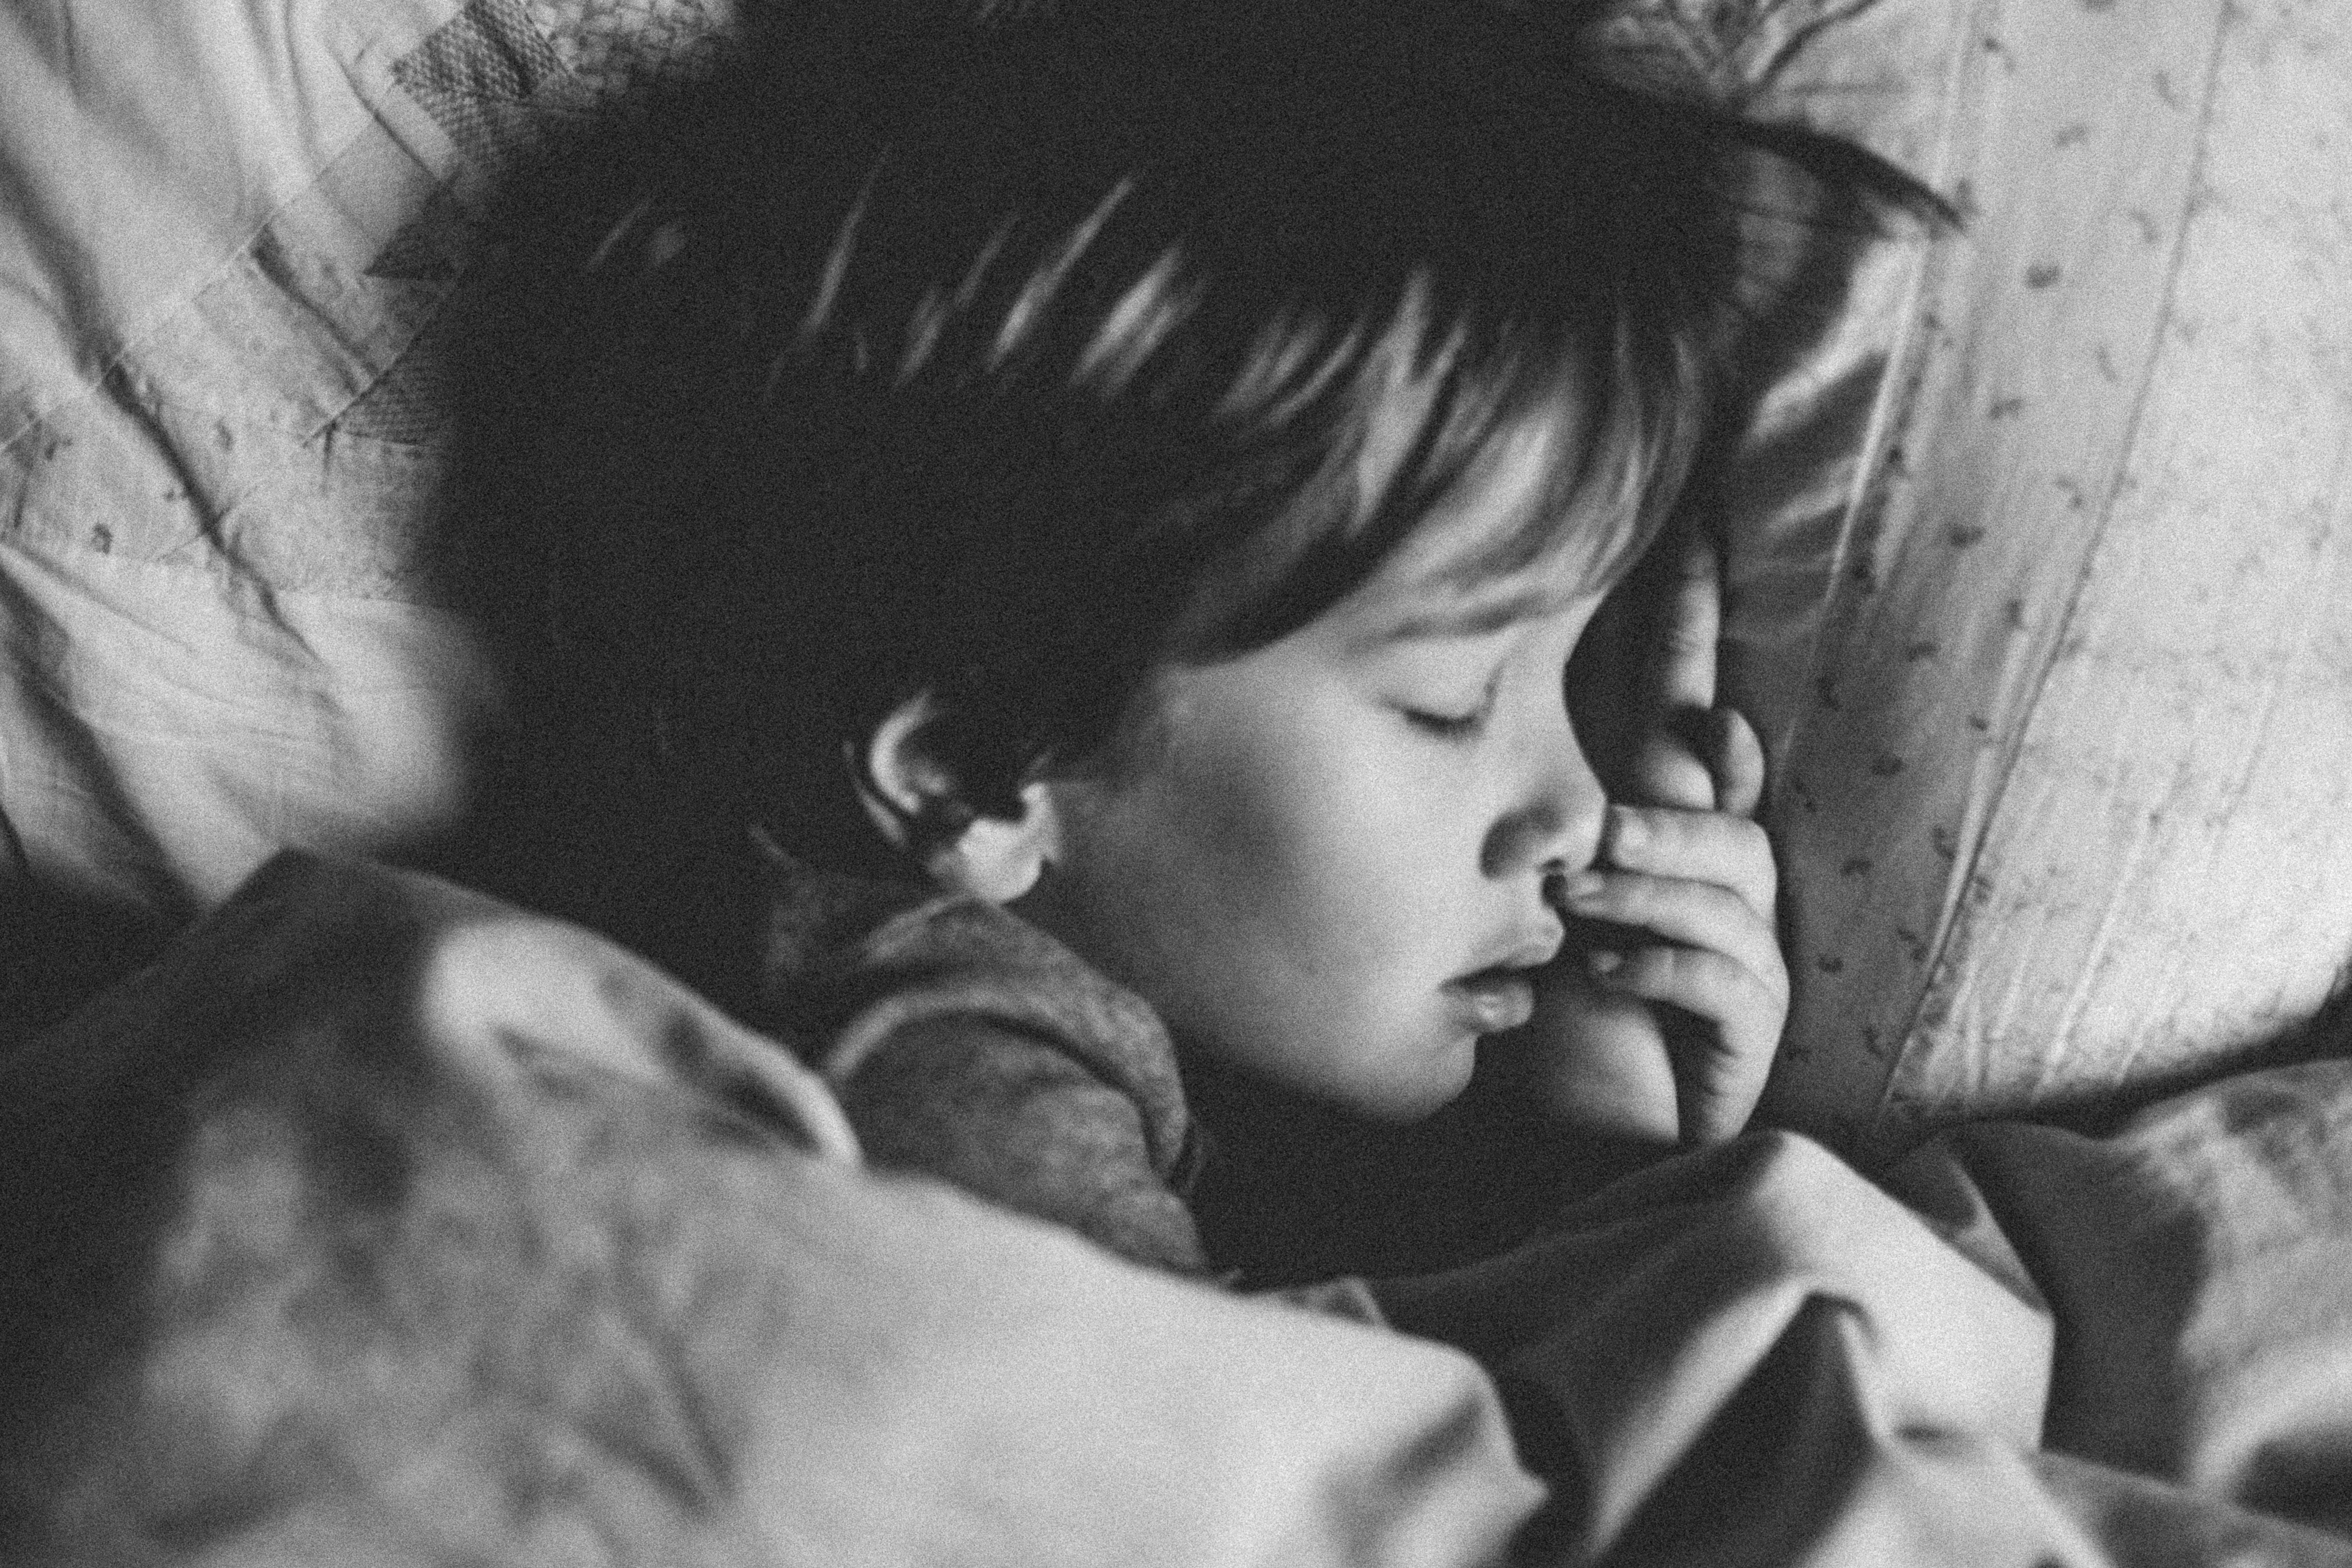 A child sleeping on the bed | Source: Unsplash